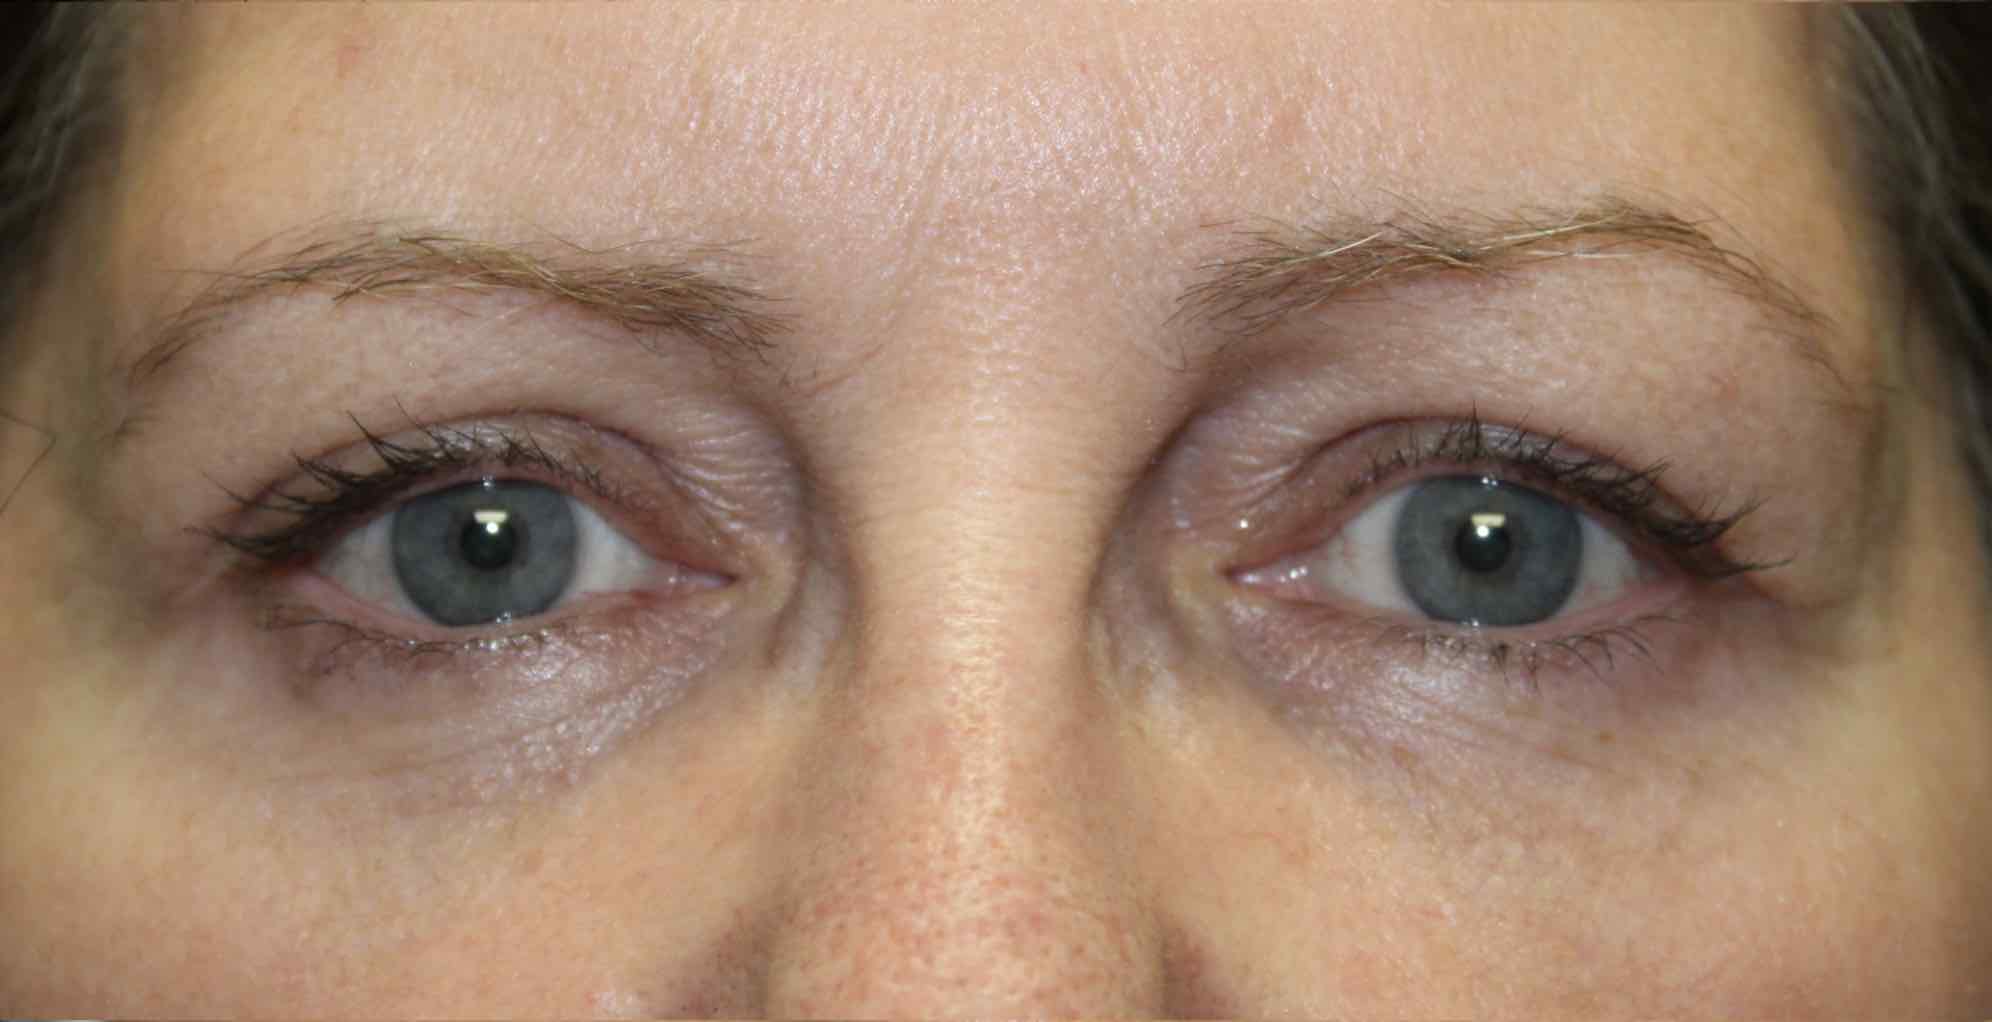 woman after blepharoplasty surgery on the eye